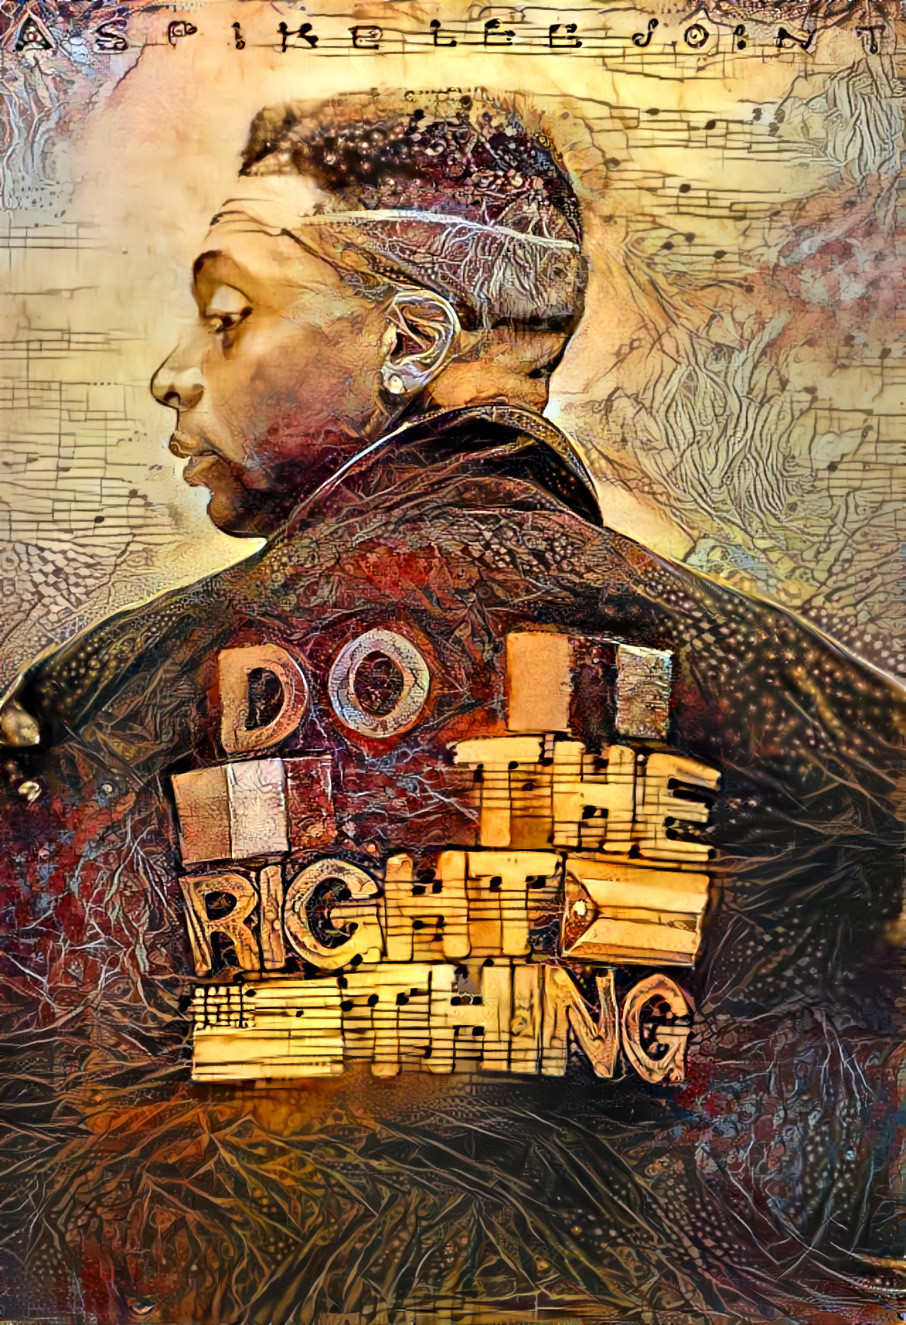 “The Right Thing”